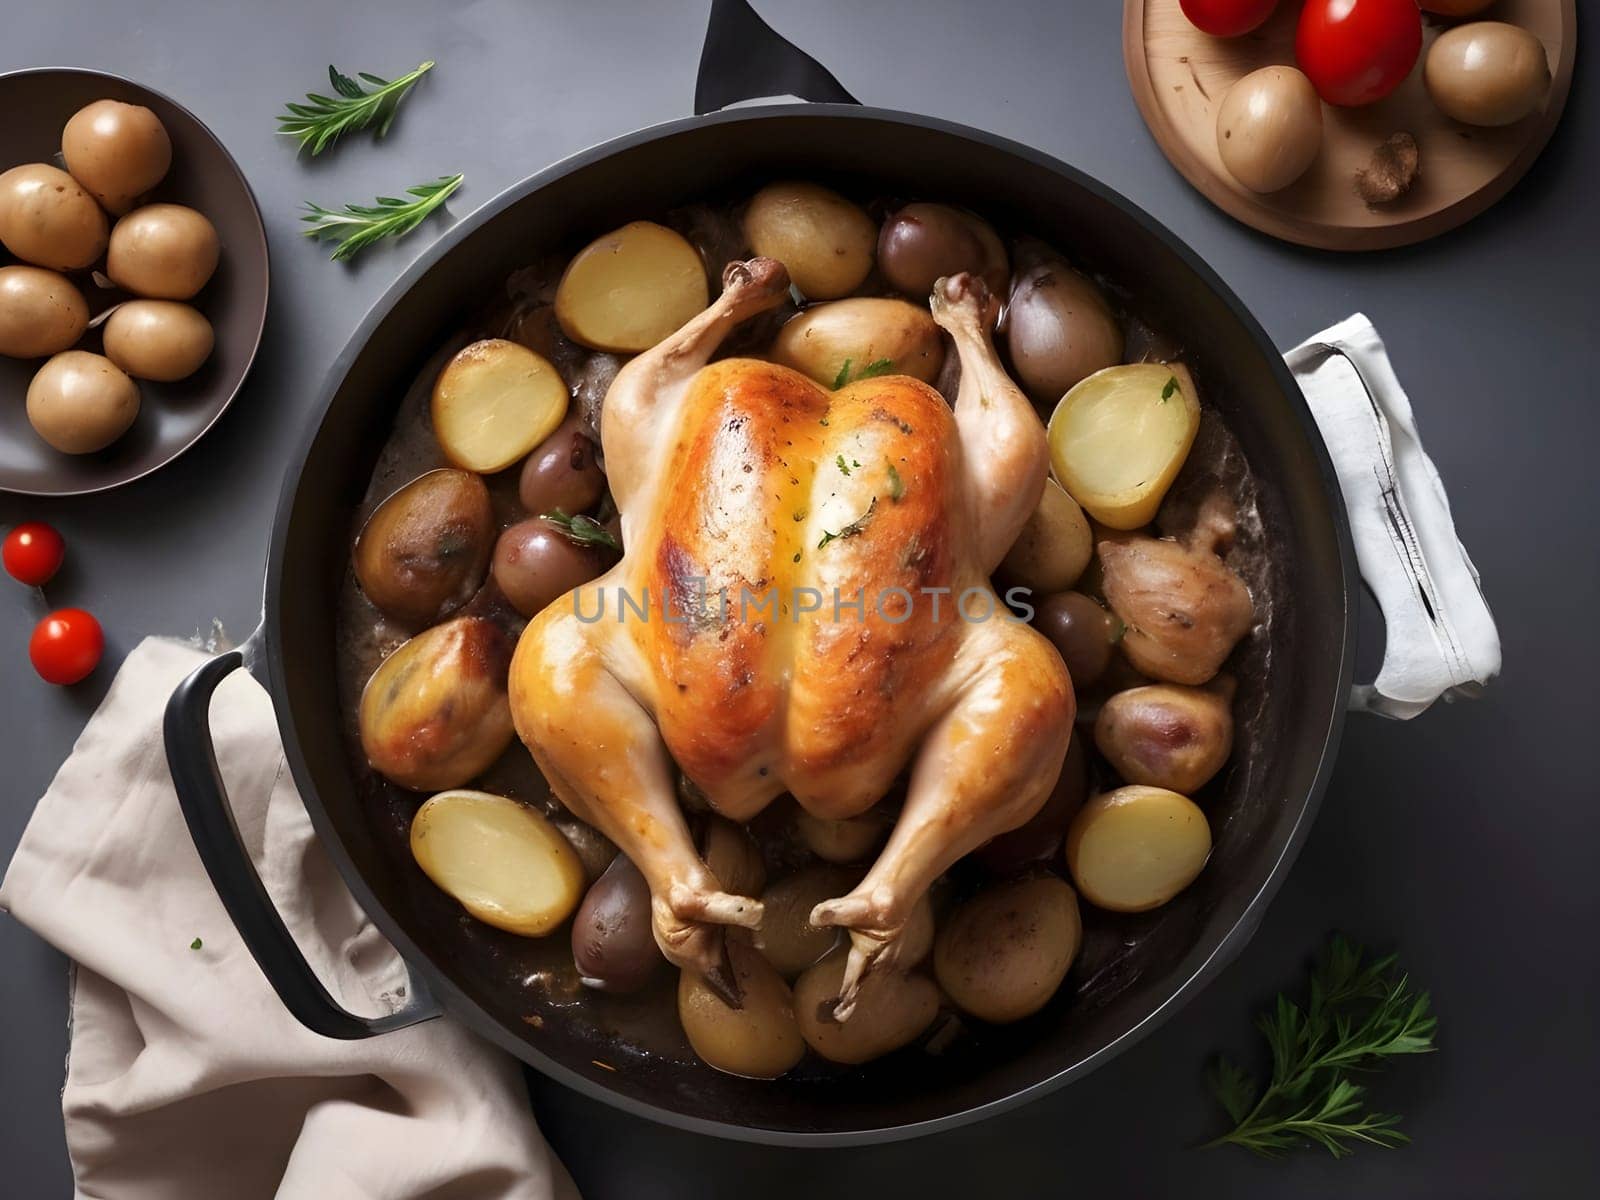 Irresistible Aromas. Capturing the Cozy Charm of Freshly Roasted Chicken and Potatoes.